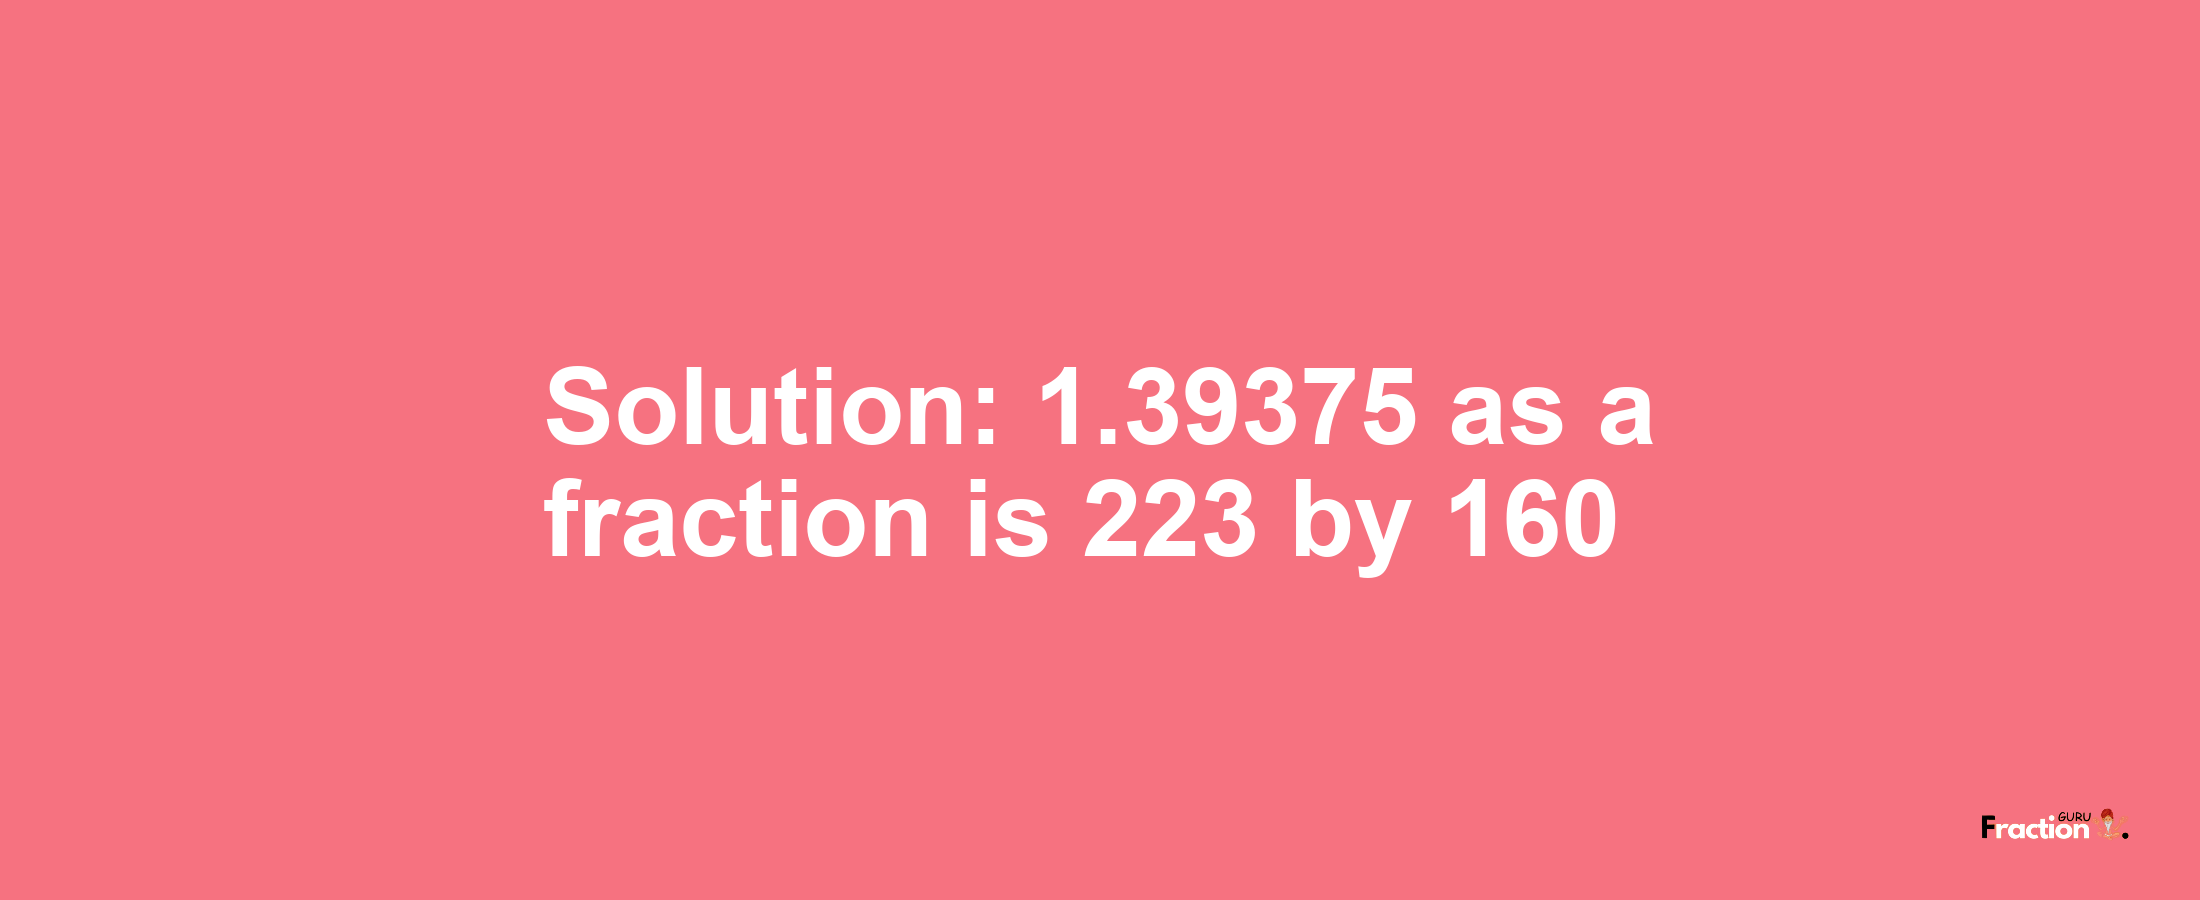 Solution:1.39375 as a fraction is 223/160